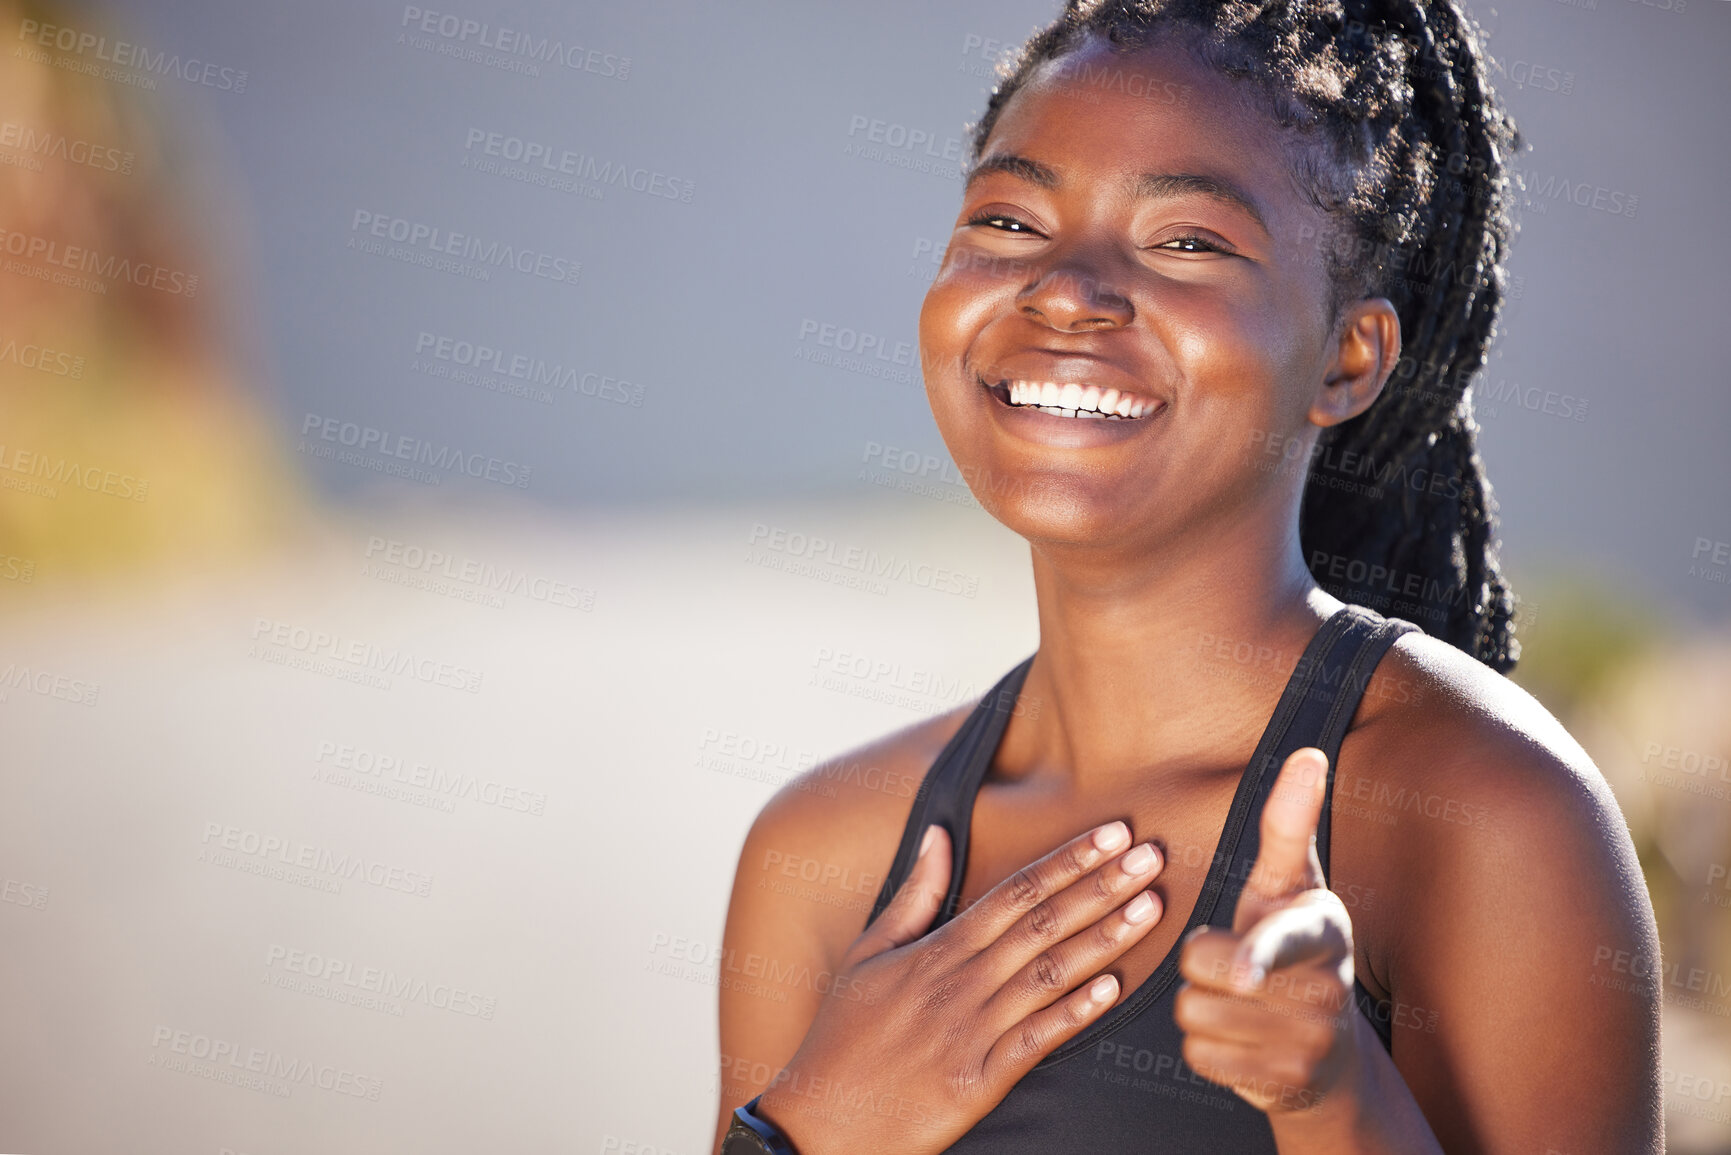 Buy stock photo One happy young fit african american woman standing alone and pointing while feeling confident after a workout. Fit and active black woman with braids feeling proud after routine training and exercise